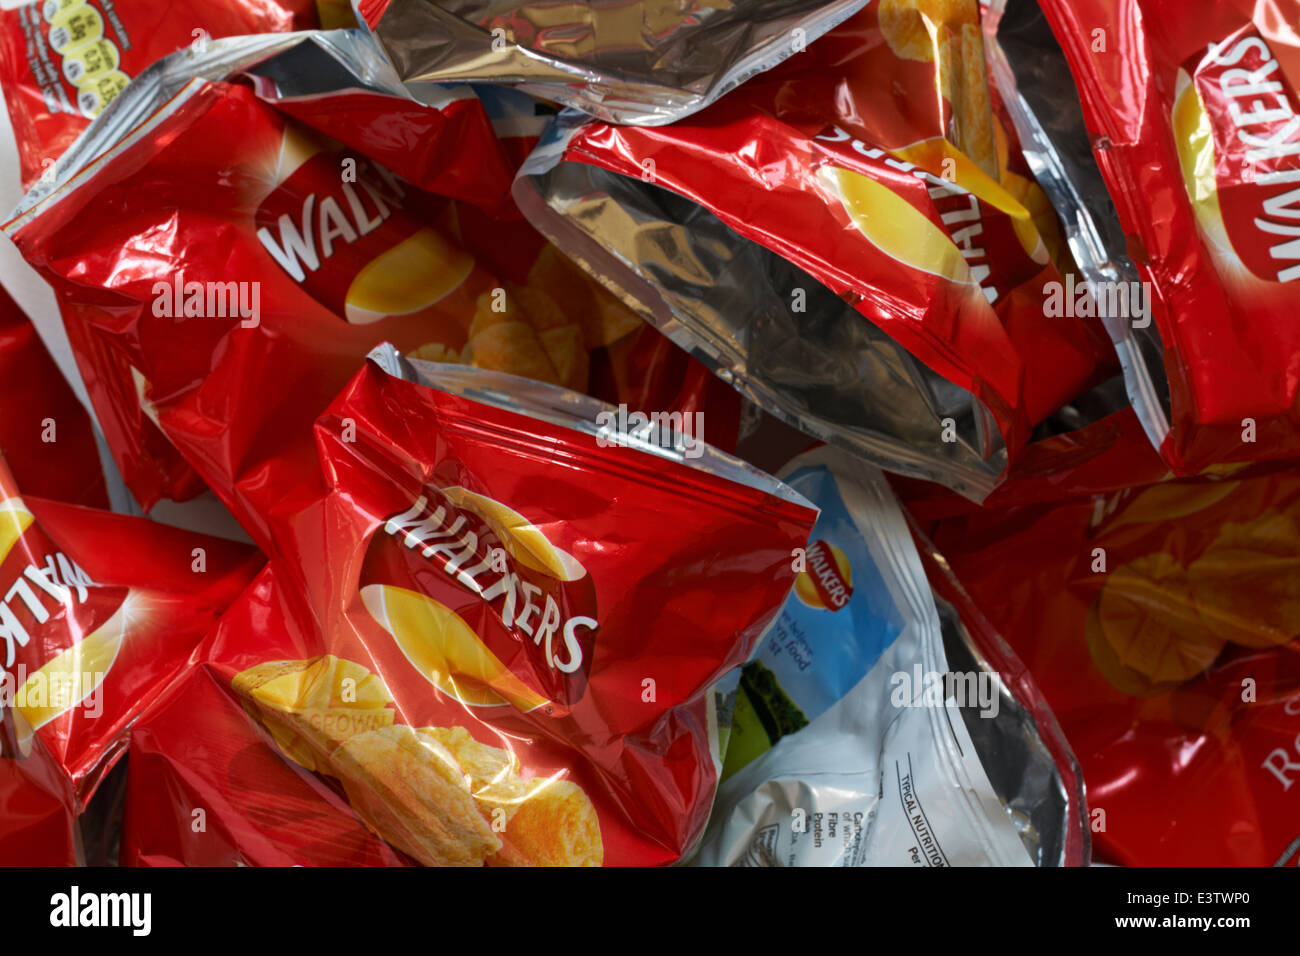 pile heap of empty packets of Walkers Ready Salted crisps Stock Photo